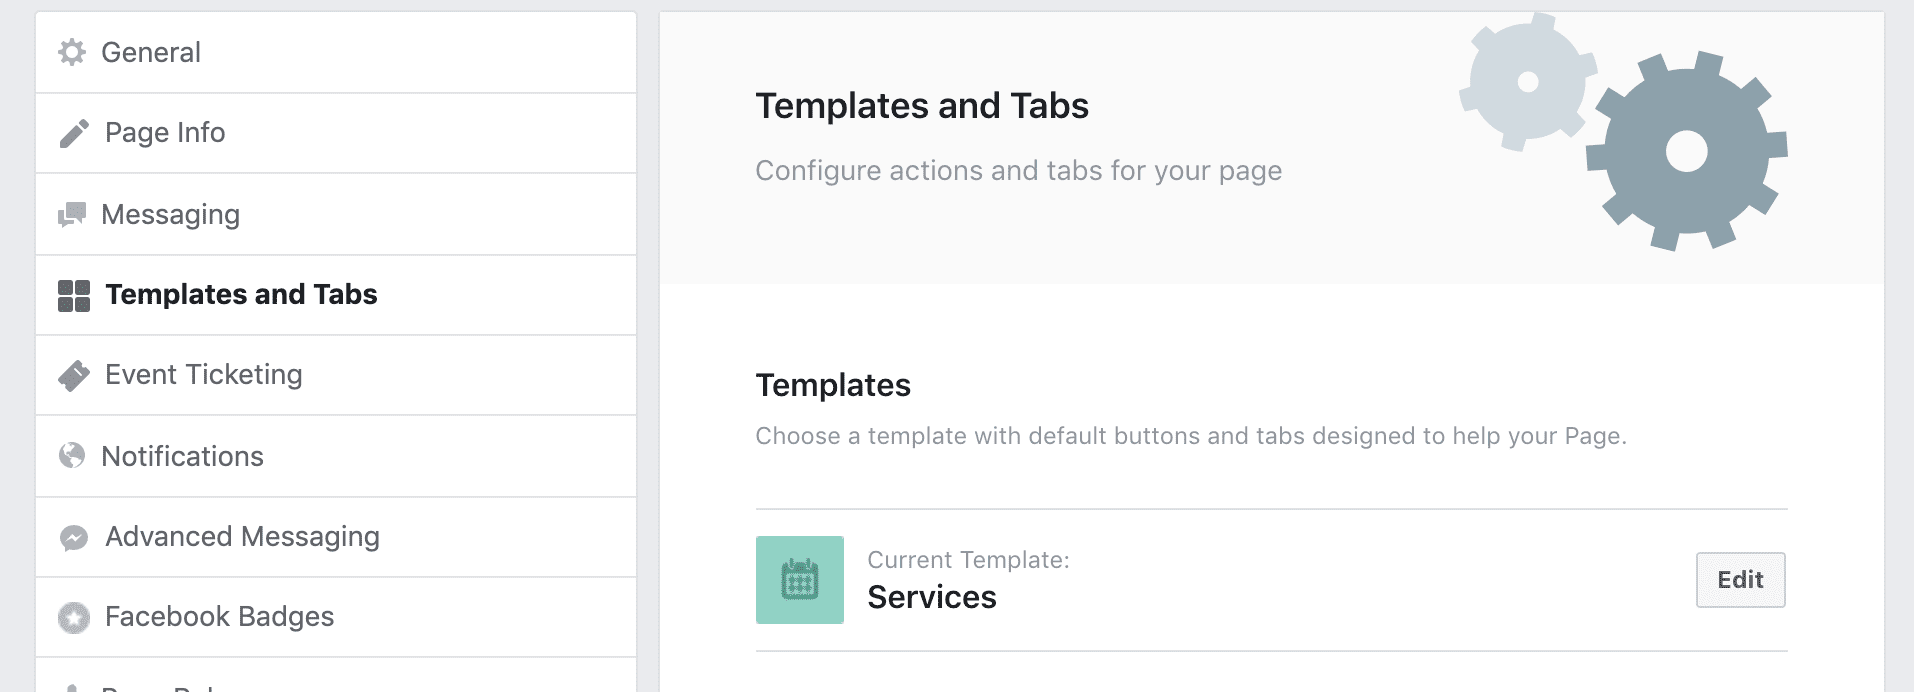 Facebook Templates and Tabs